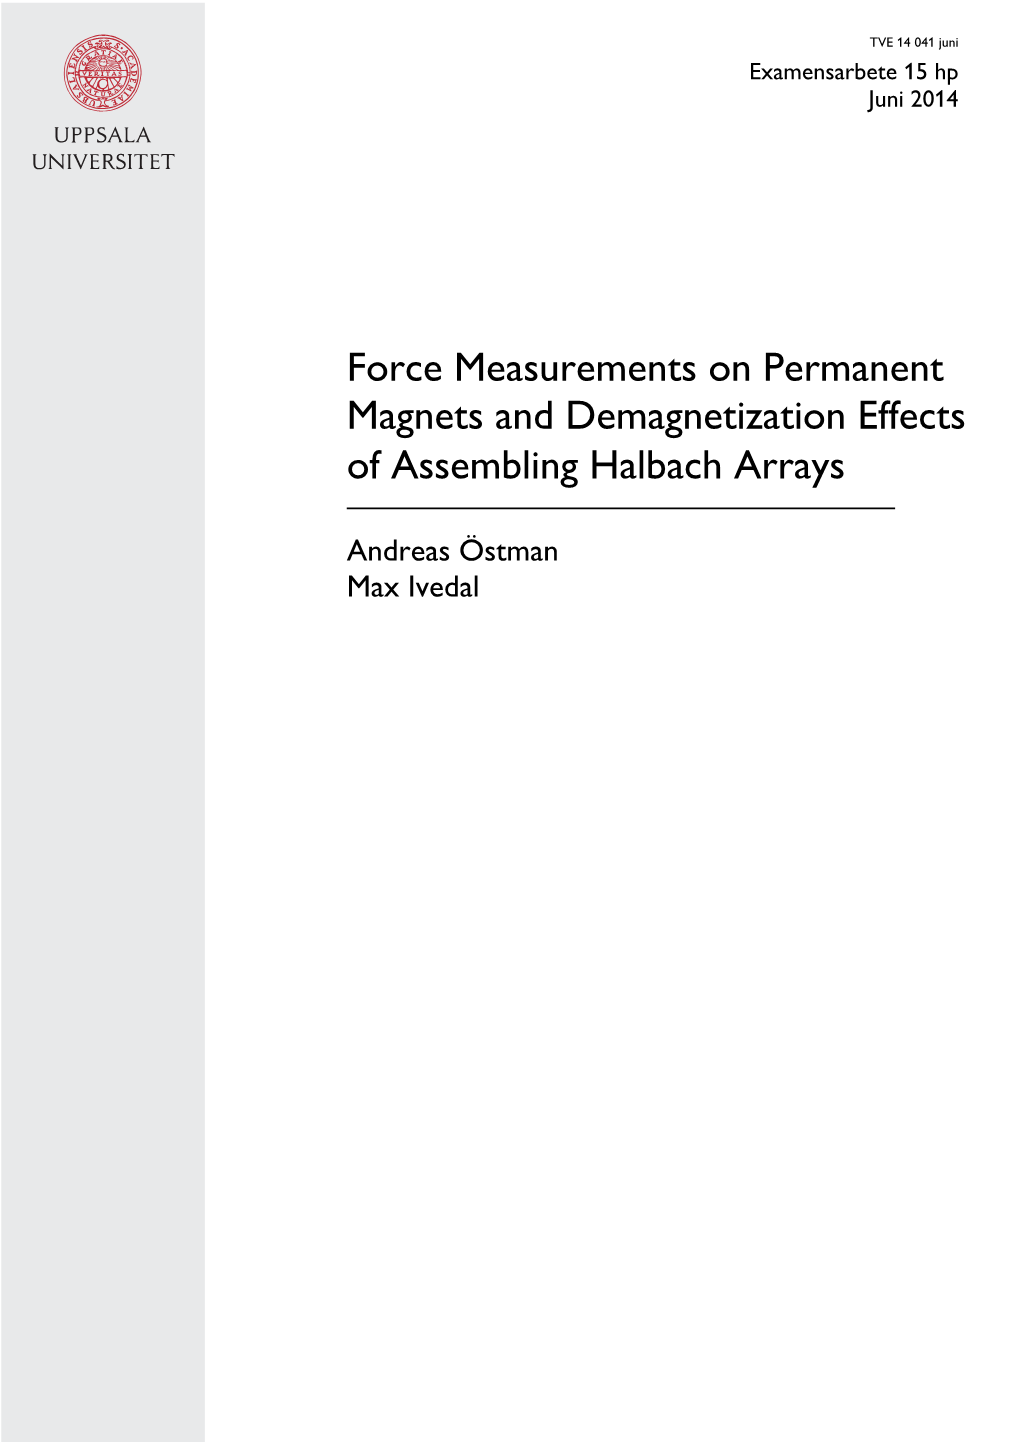 Force Measurements on Permanent Magnets and Demagnetization Effects of Assembling Halbach Arrays